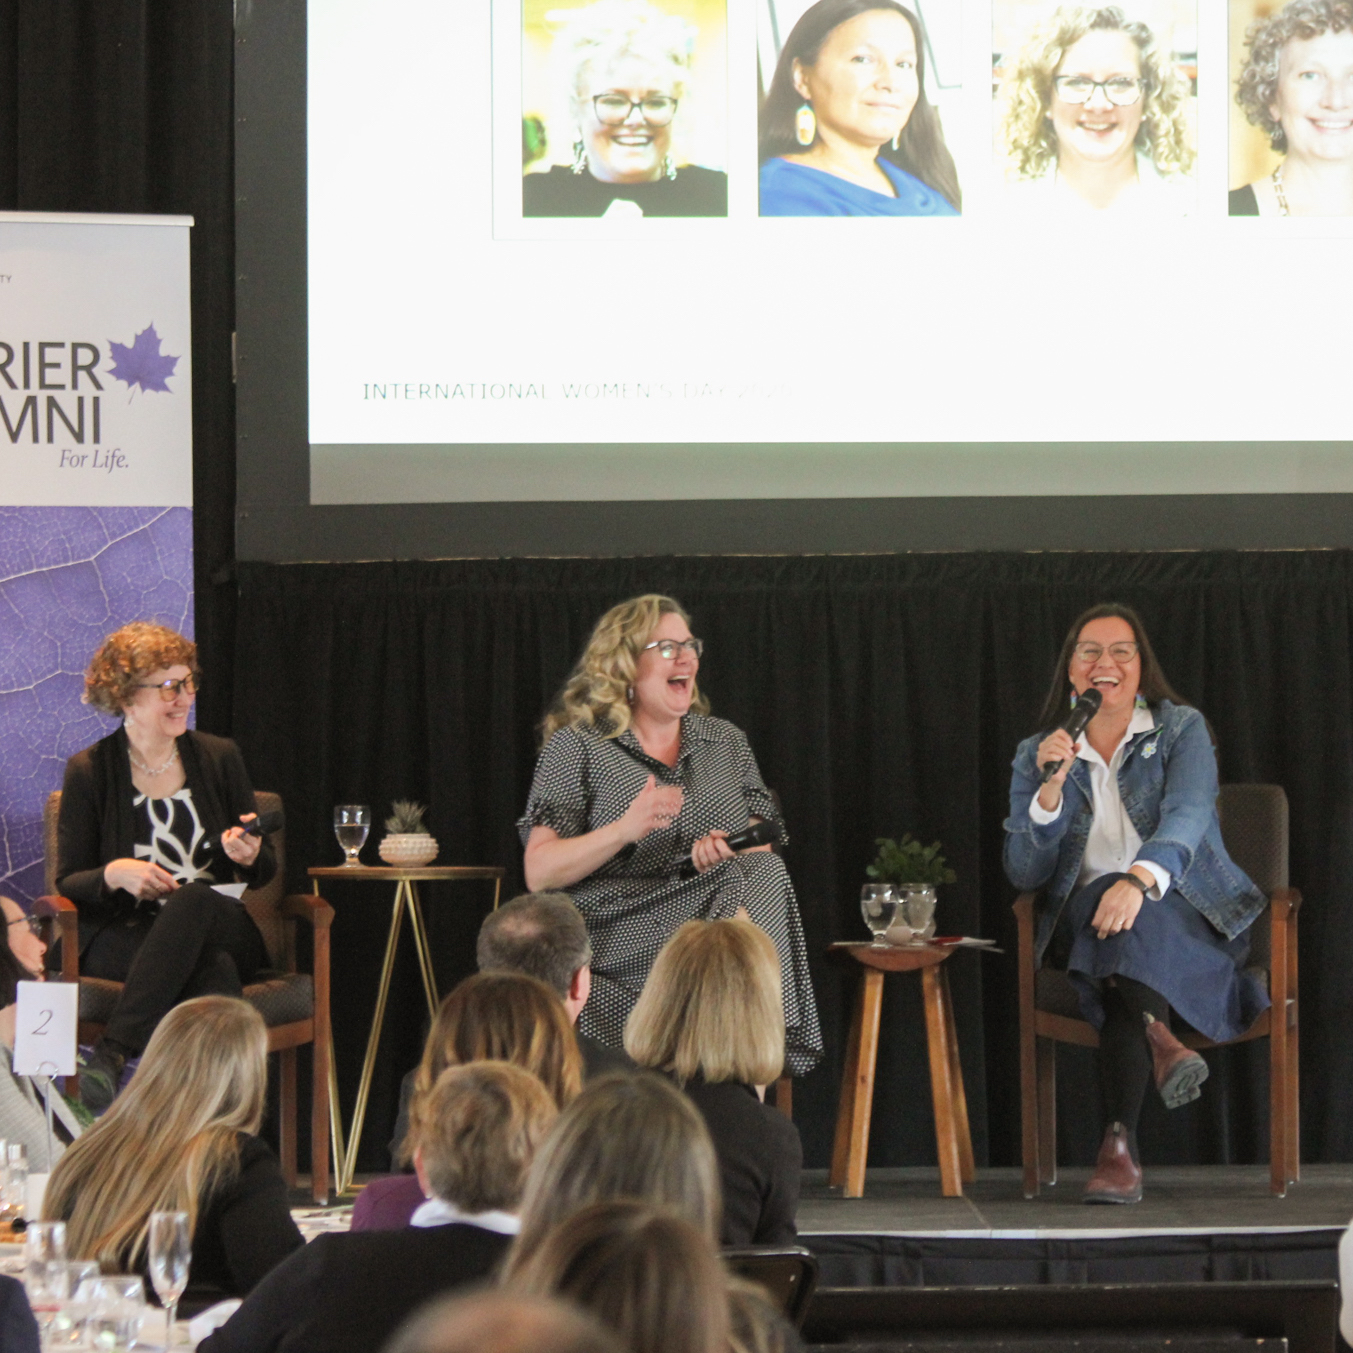 Alison Blay-Palmer, Wendi Campbell, and Kathy Absolon sit in a row on a stage, laughing